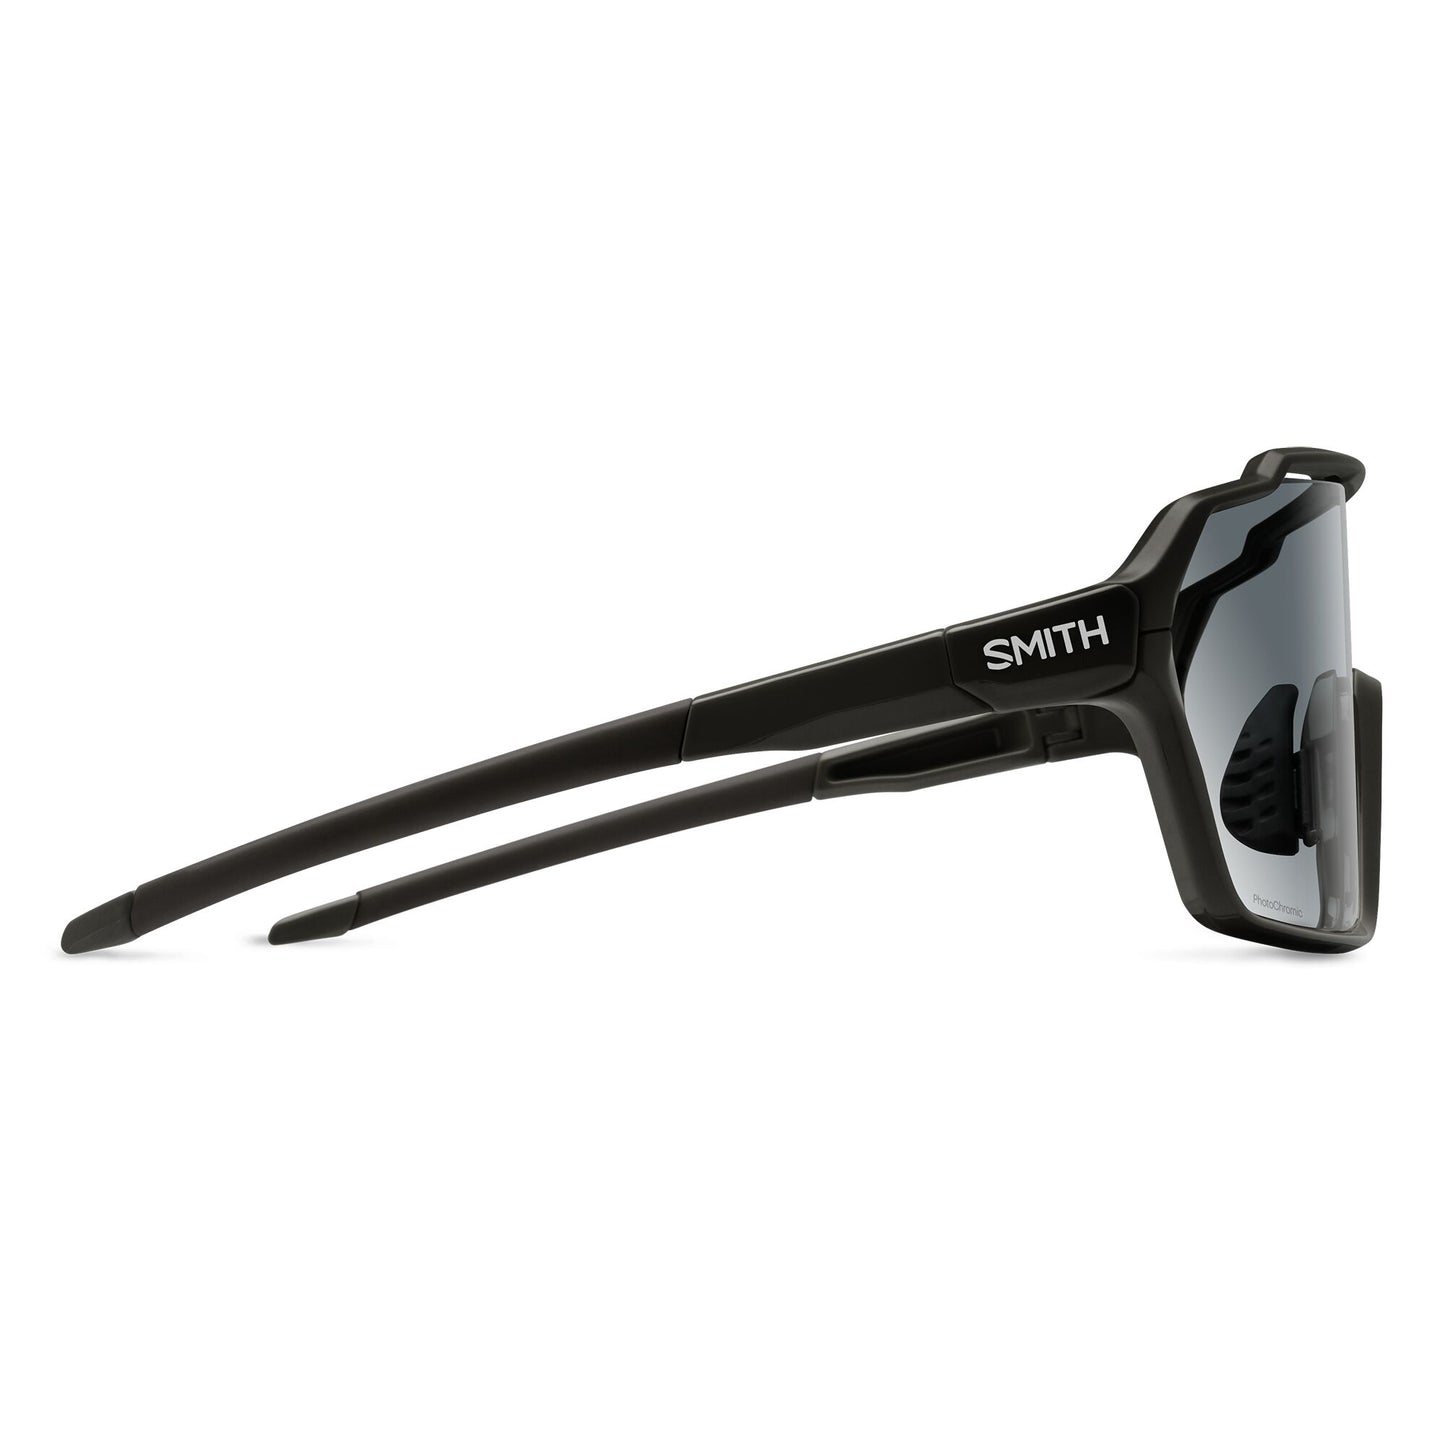 Smith Shift XL Mag Sunglasses - One Size Fits Most - Black - ChromaPop Photochromic Clear To Gray Lens